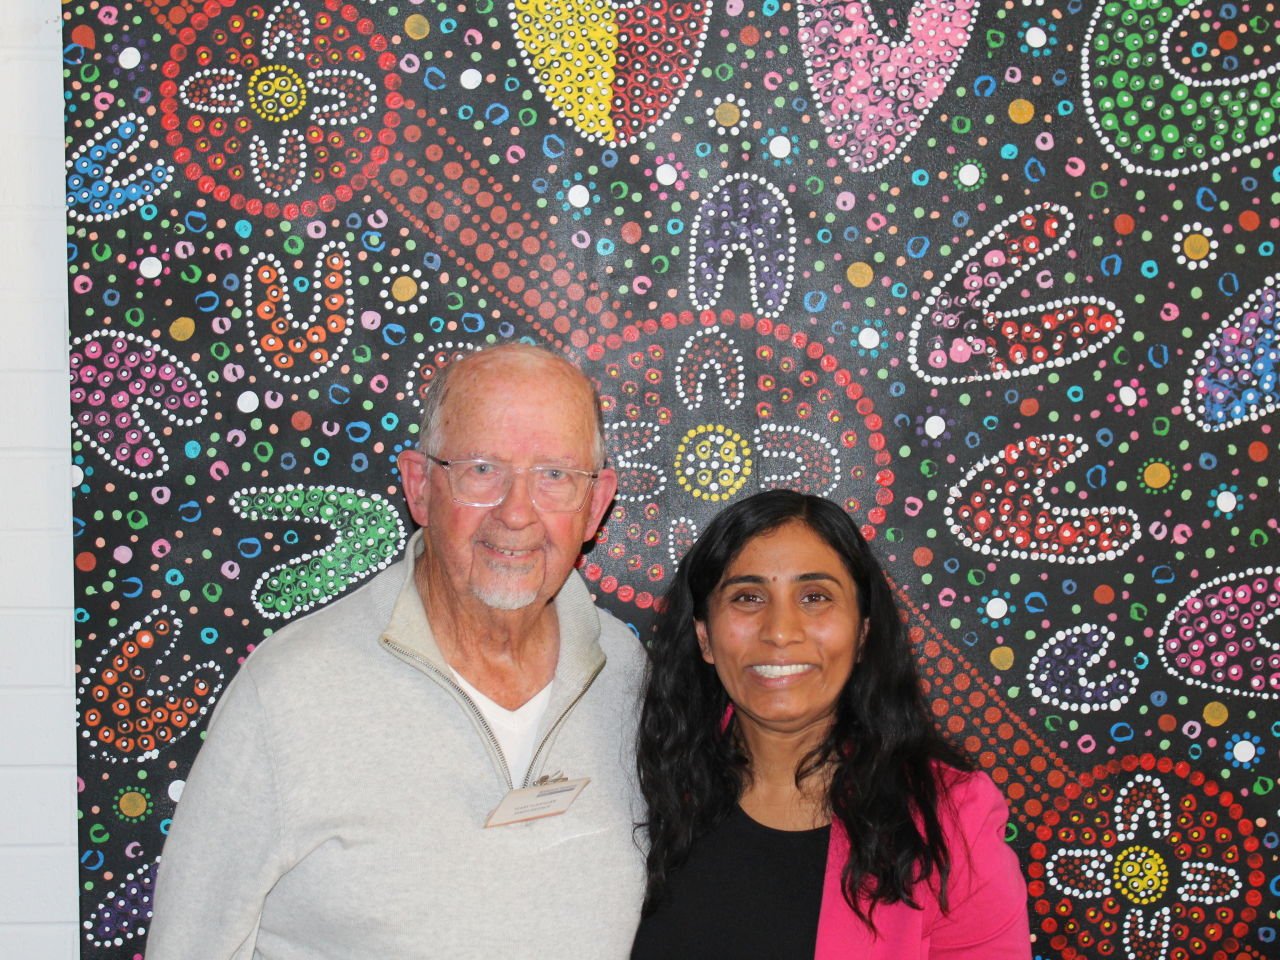 Terry Flanagan, President with Zaneta Mascarenhas MP for Swan, Guest Speaker at the Meeting on 14 April 2023